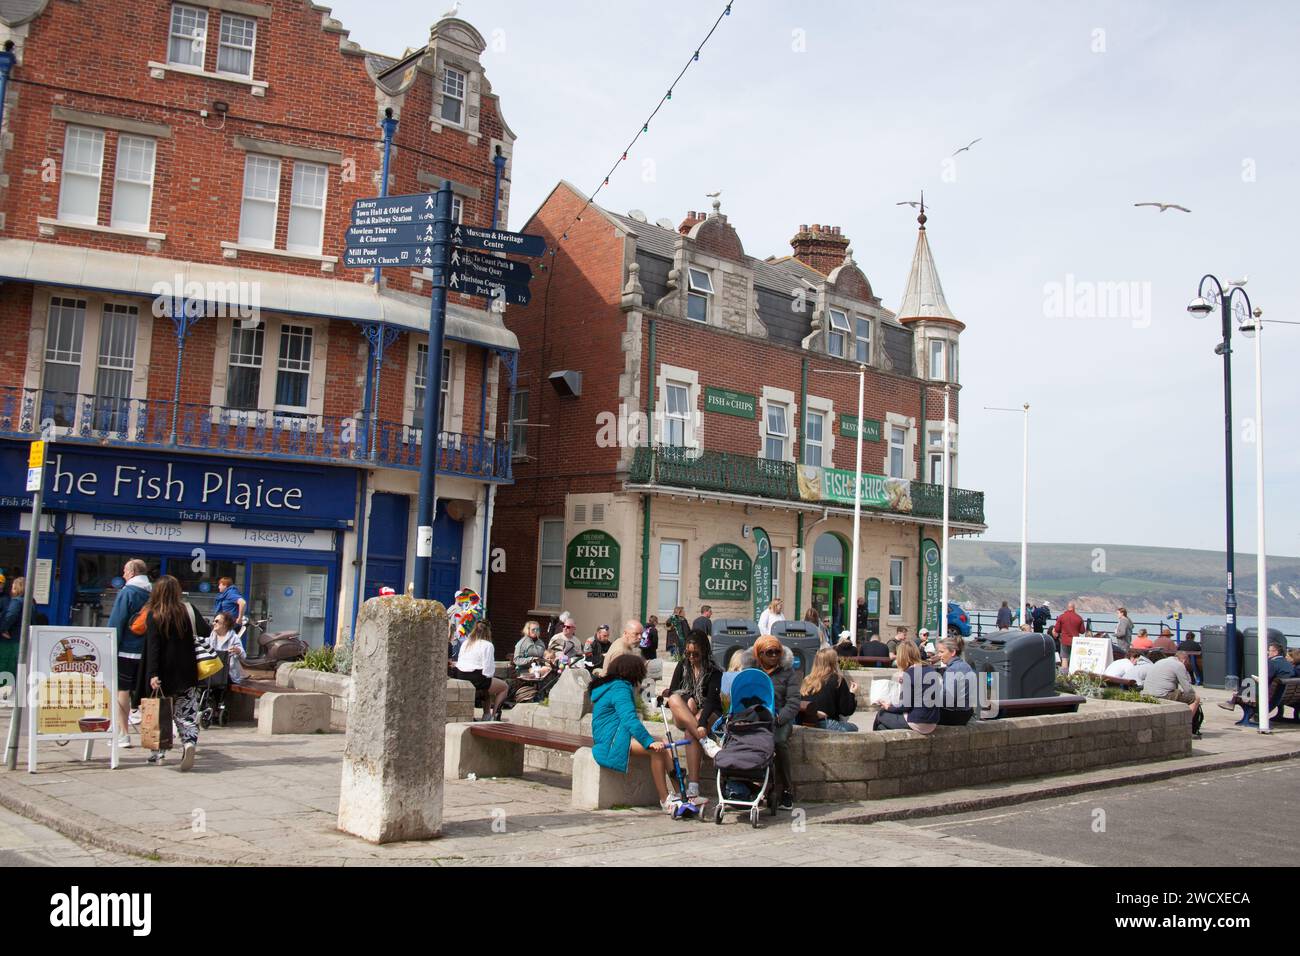 A fish and chips take away on the seafront in Swanage, Dorset in the UK Stock Photo